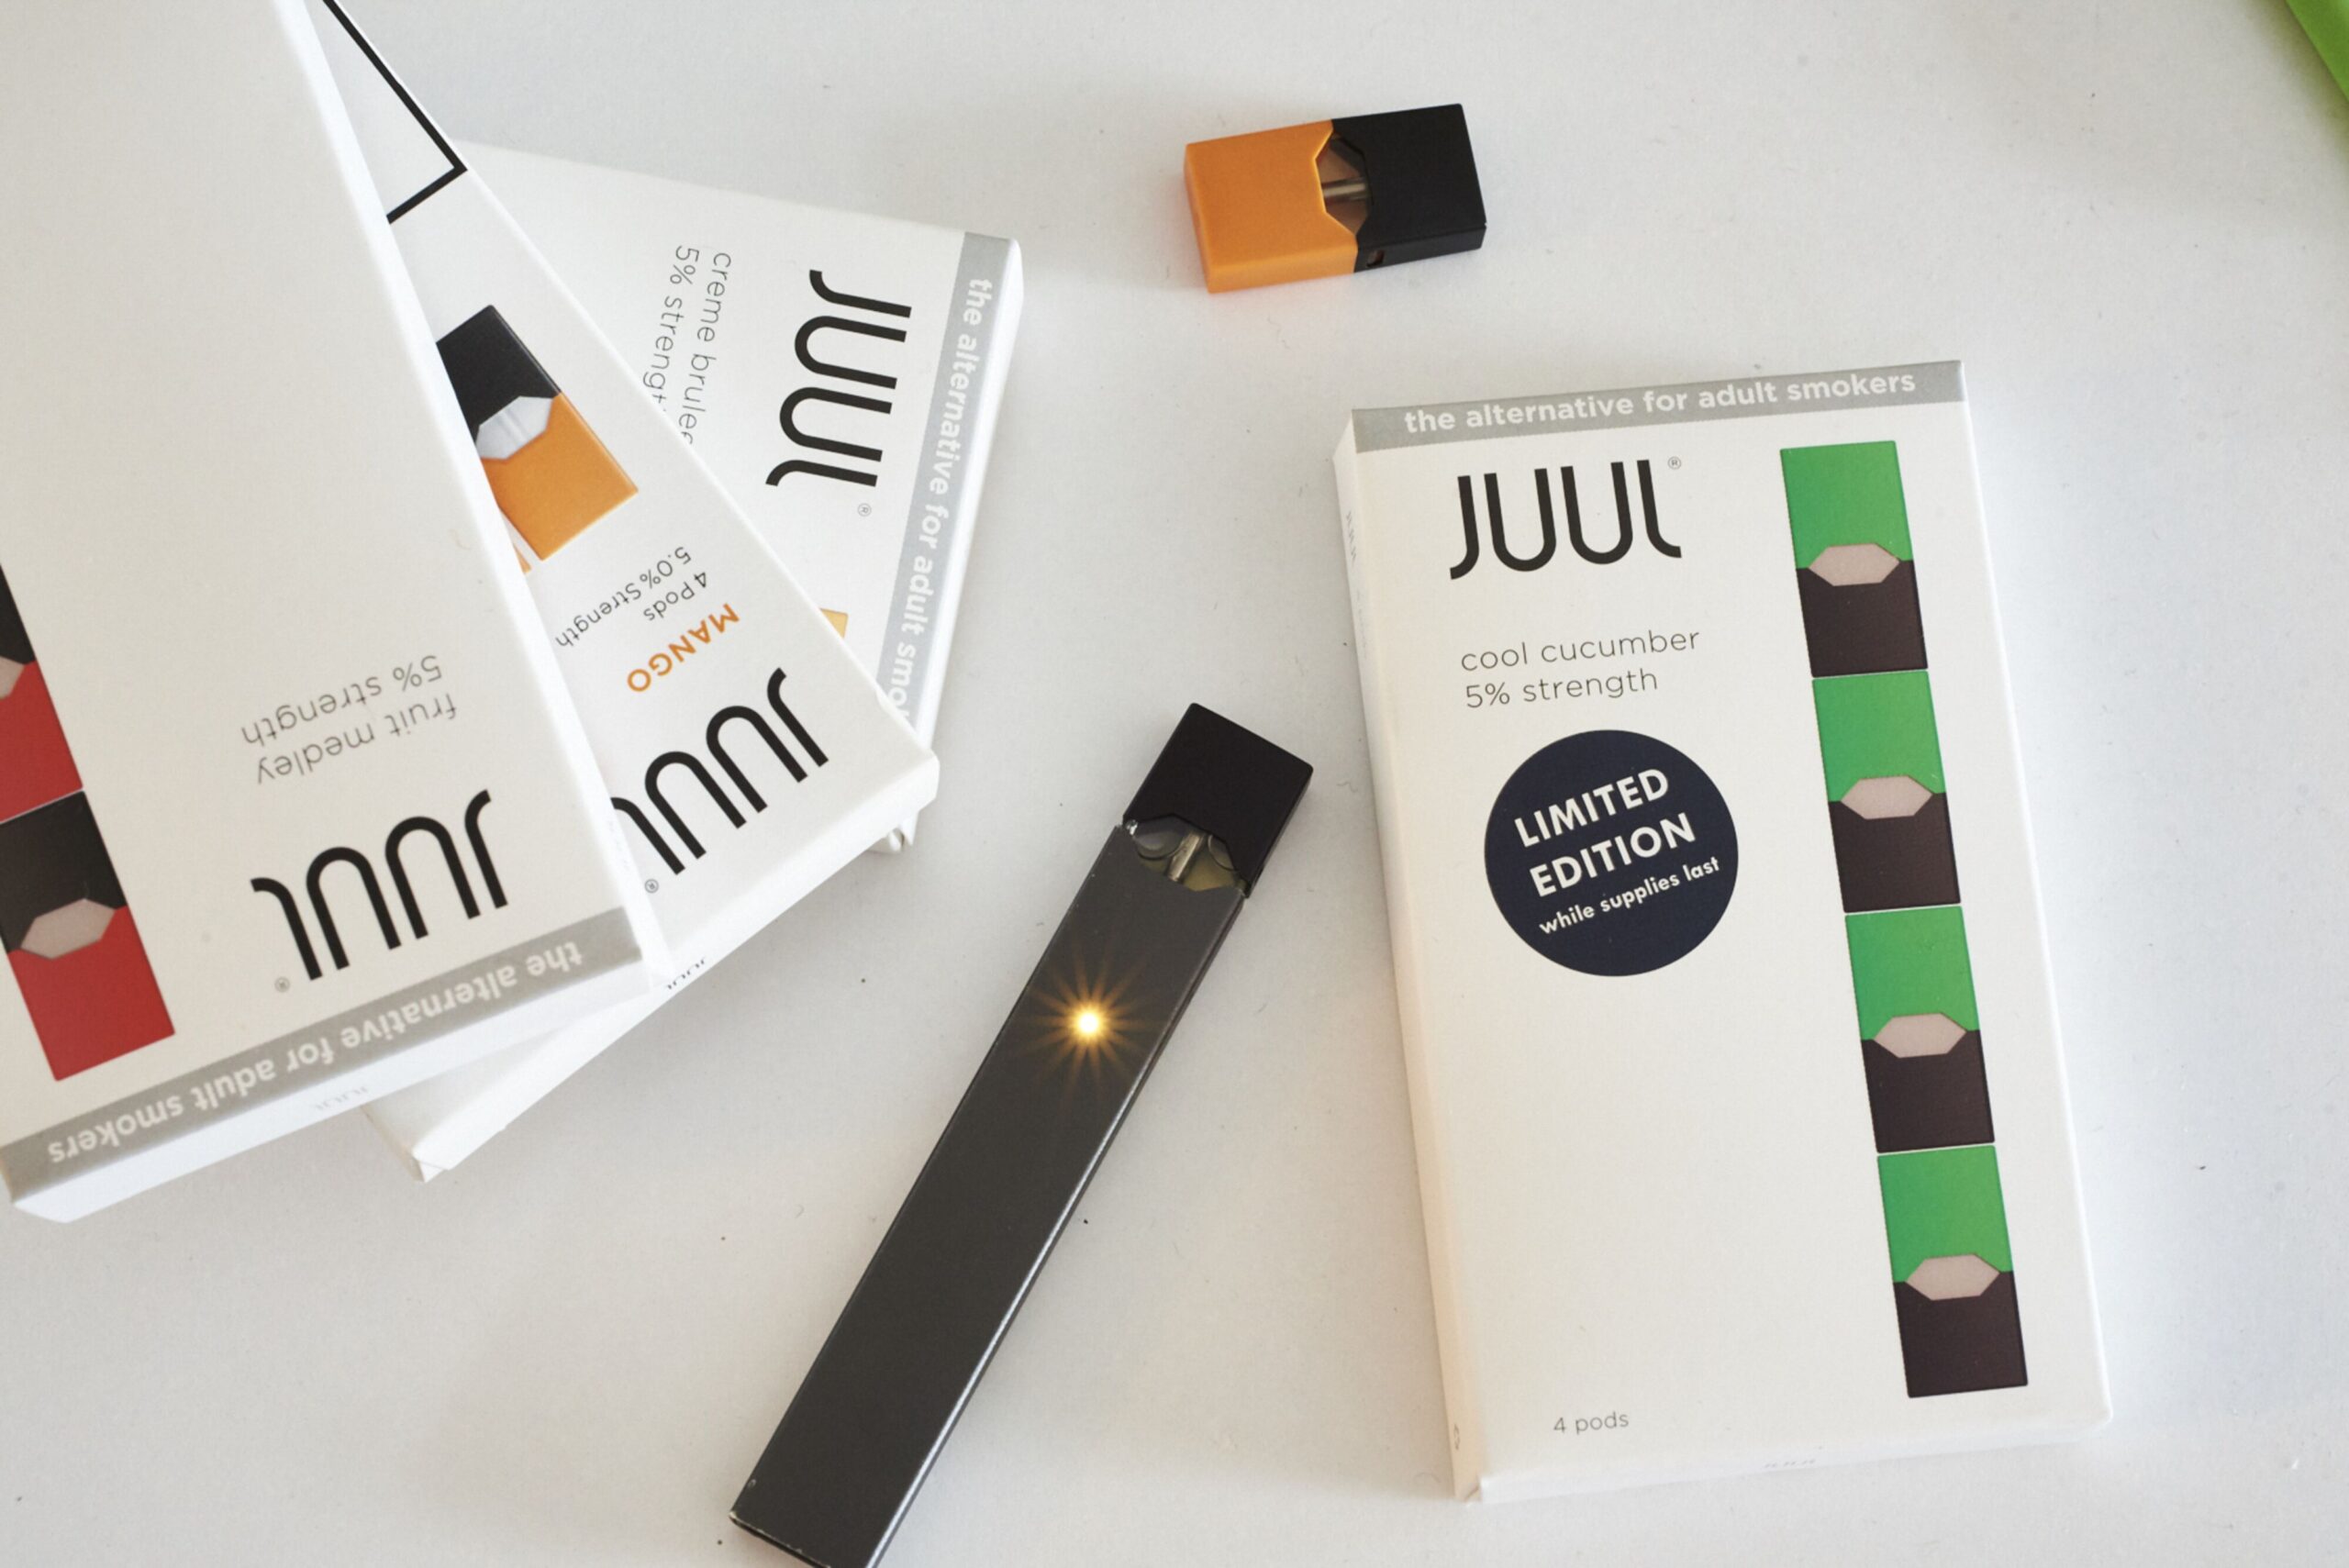 Altria Tells Jury It Didn’t Benefit From Juul Youth Vaping Push